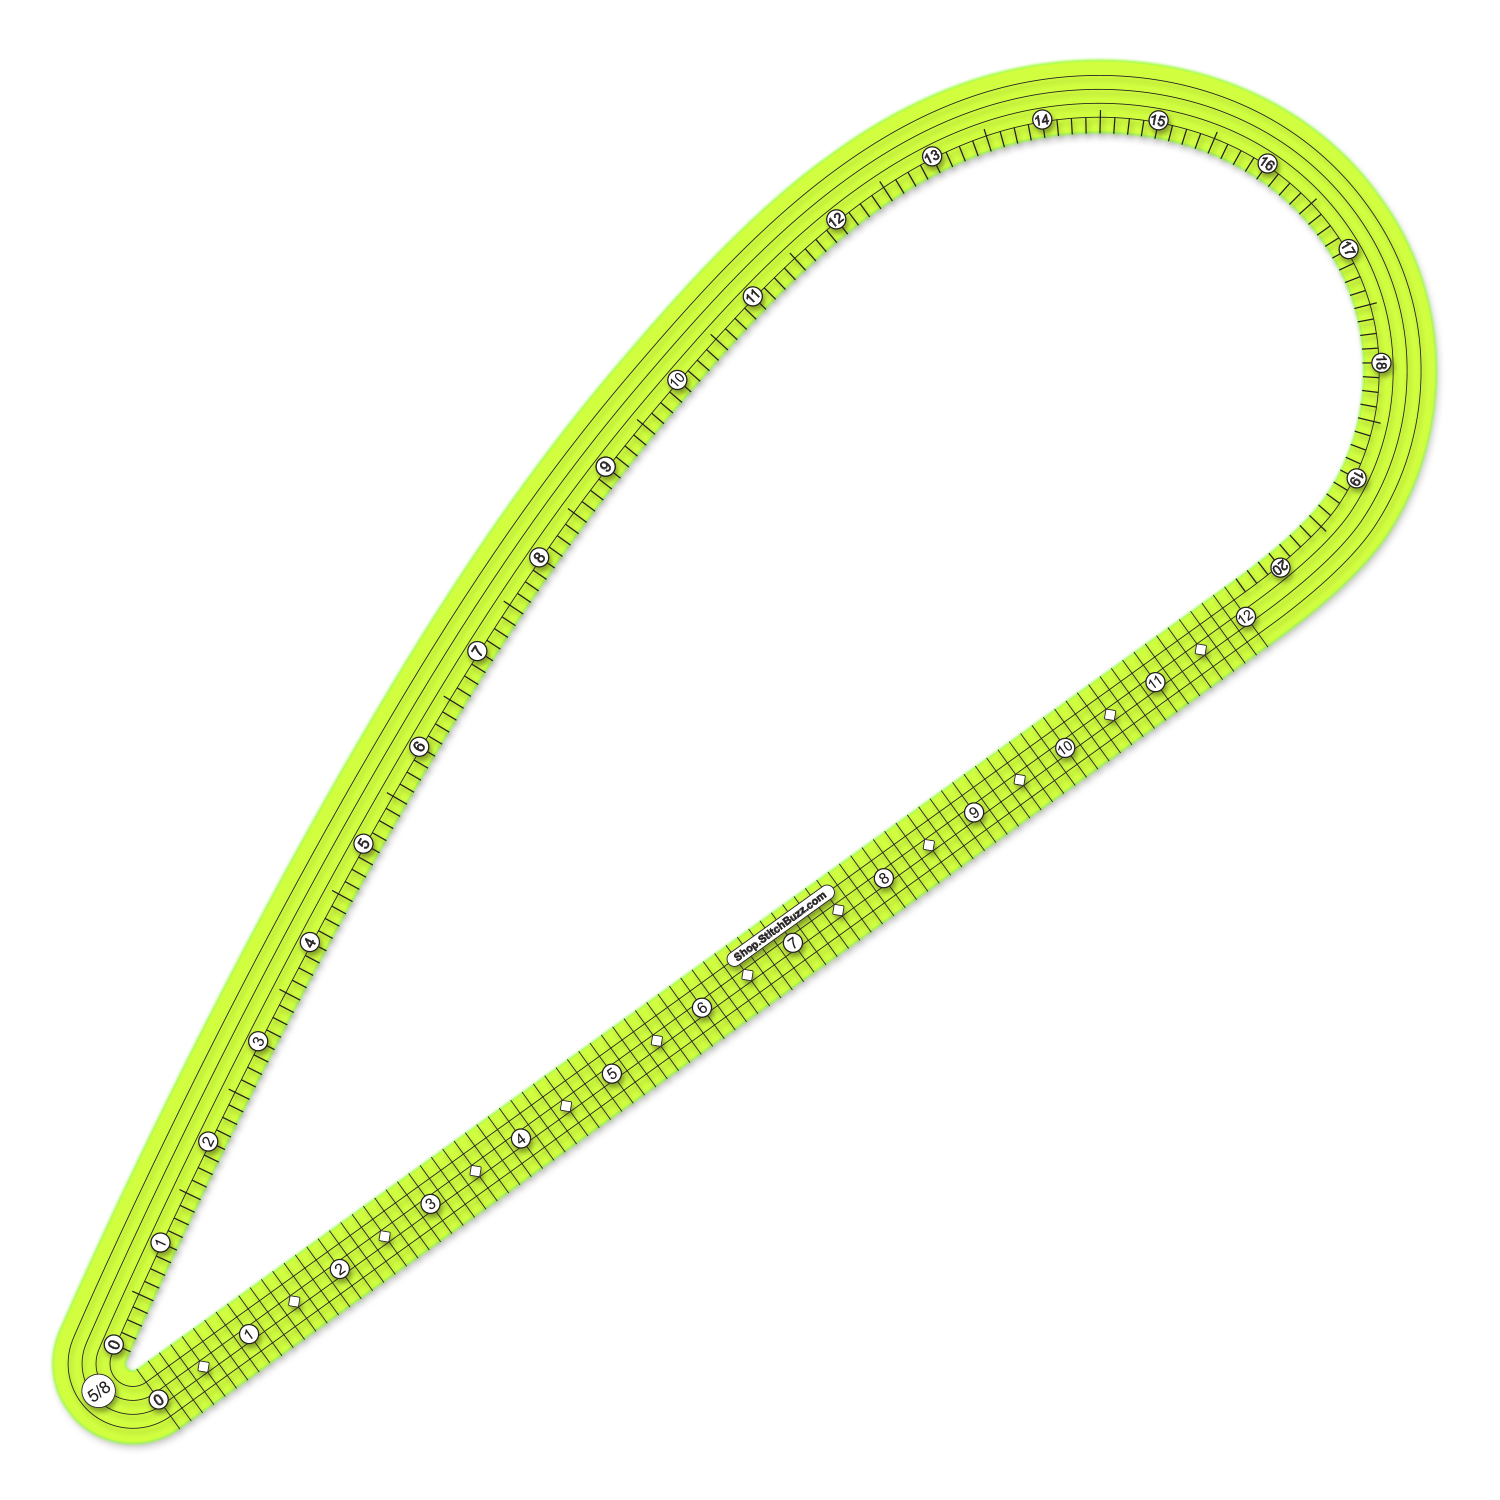 5/8ths five-eighths inch  seam allowance french curve ruler transparent yellow green plastic